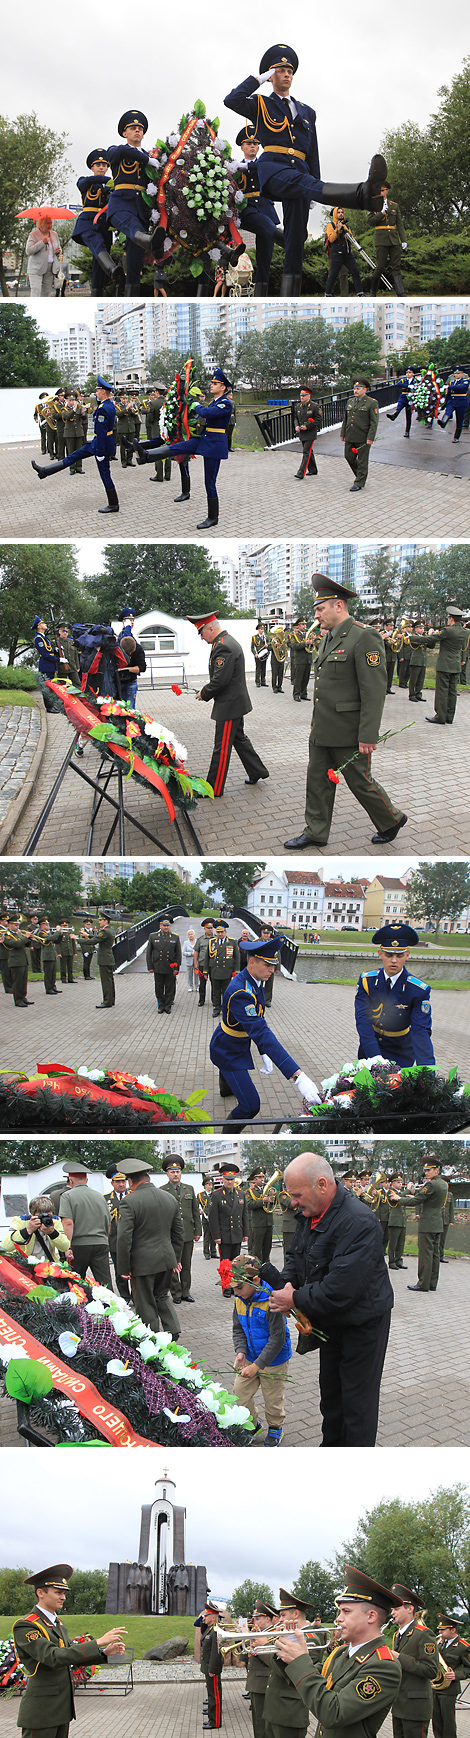 Ceremony to lay flowers at the memorial on the Island of Courage and Sorrow